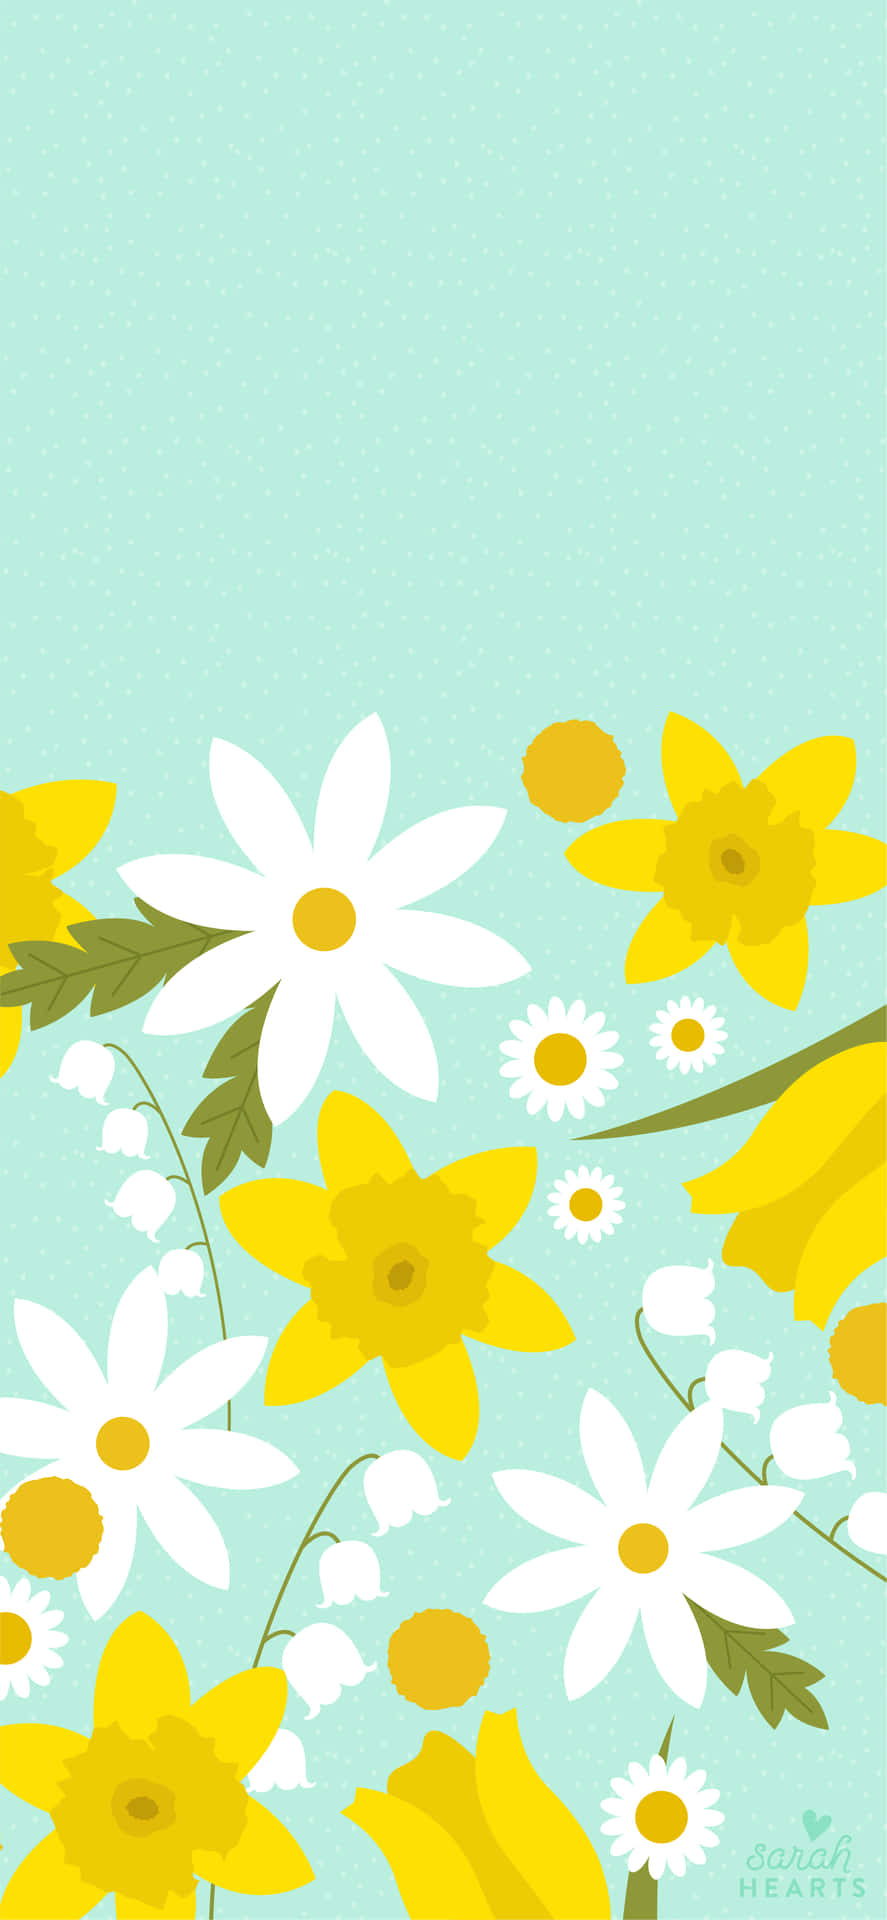 Brighten up your day with a cute spring wallpaper for your iPhone! Wallpaper